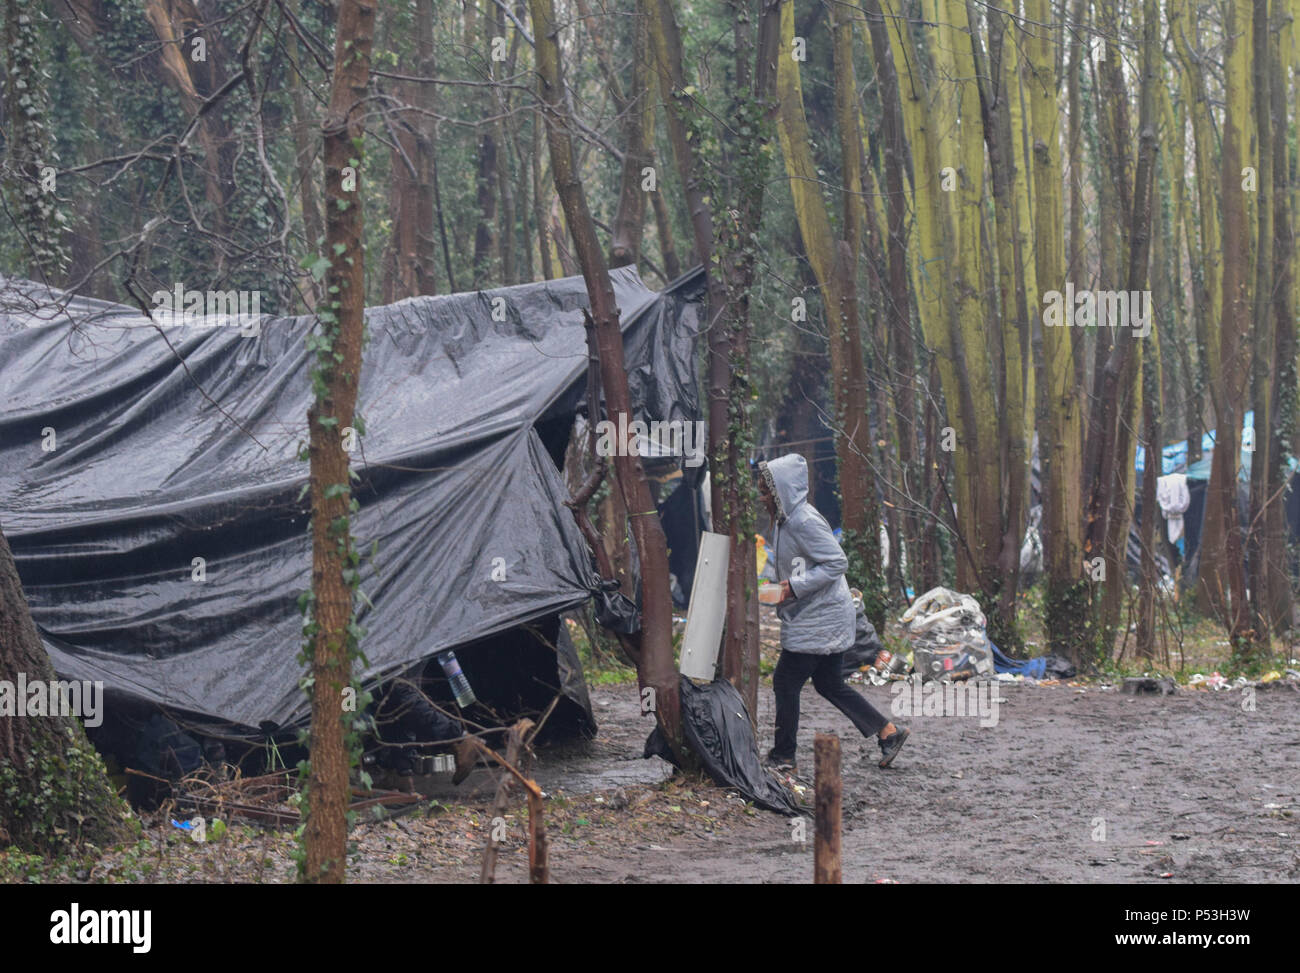 February 20, 2015 - Calais, France: Hundreds of illegal migrants live in tents in an industrial zone of Calais as they wait for an opportunity to get to Britain. The migrants, who come mostly from Erythrea, Ethiopia, Afghanistan, Syria, and Sudan try their luck every night by discreetly boarding trucks about to enter the ferry boat or the Eurotunnel to England. Tentes de migrants dans la 'jungle' tioxide de Calais. Stock Photo